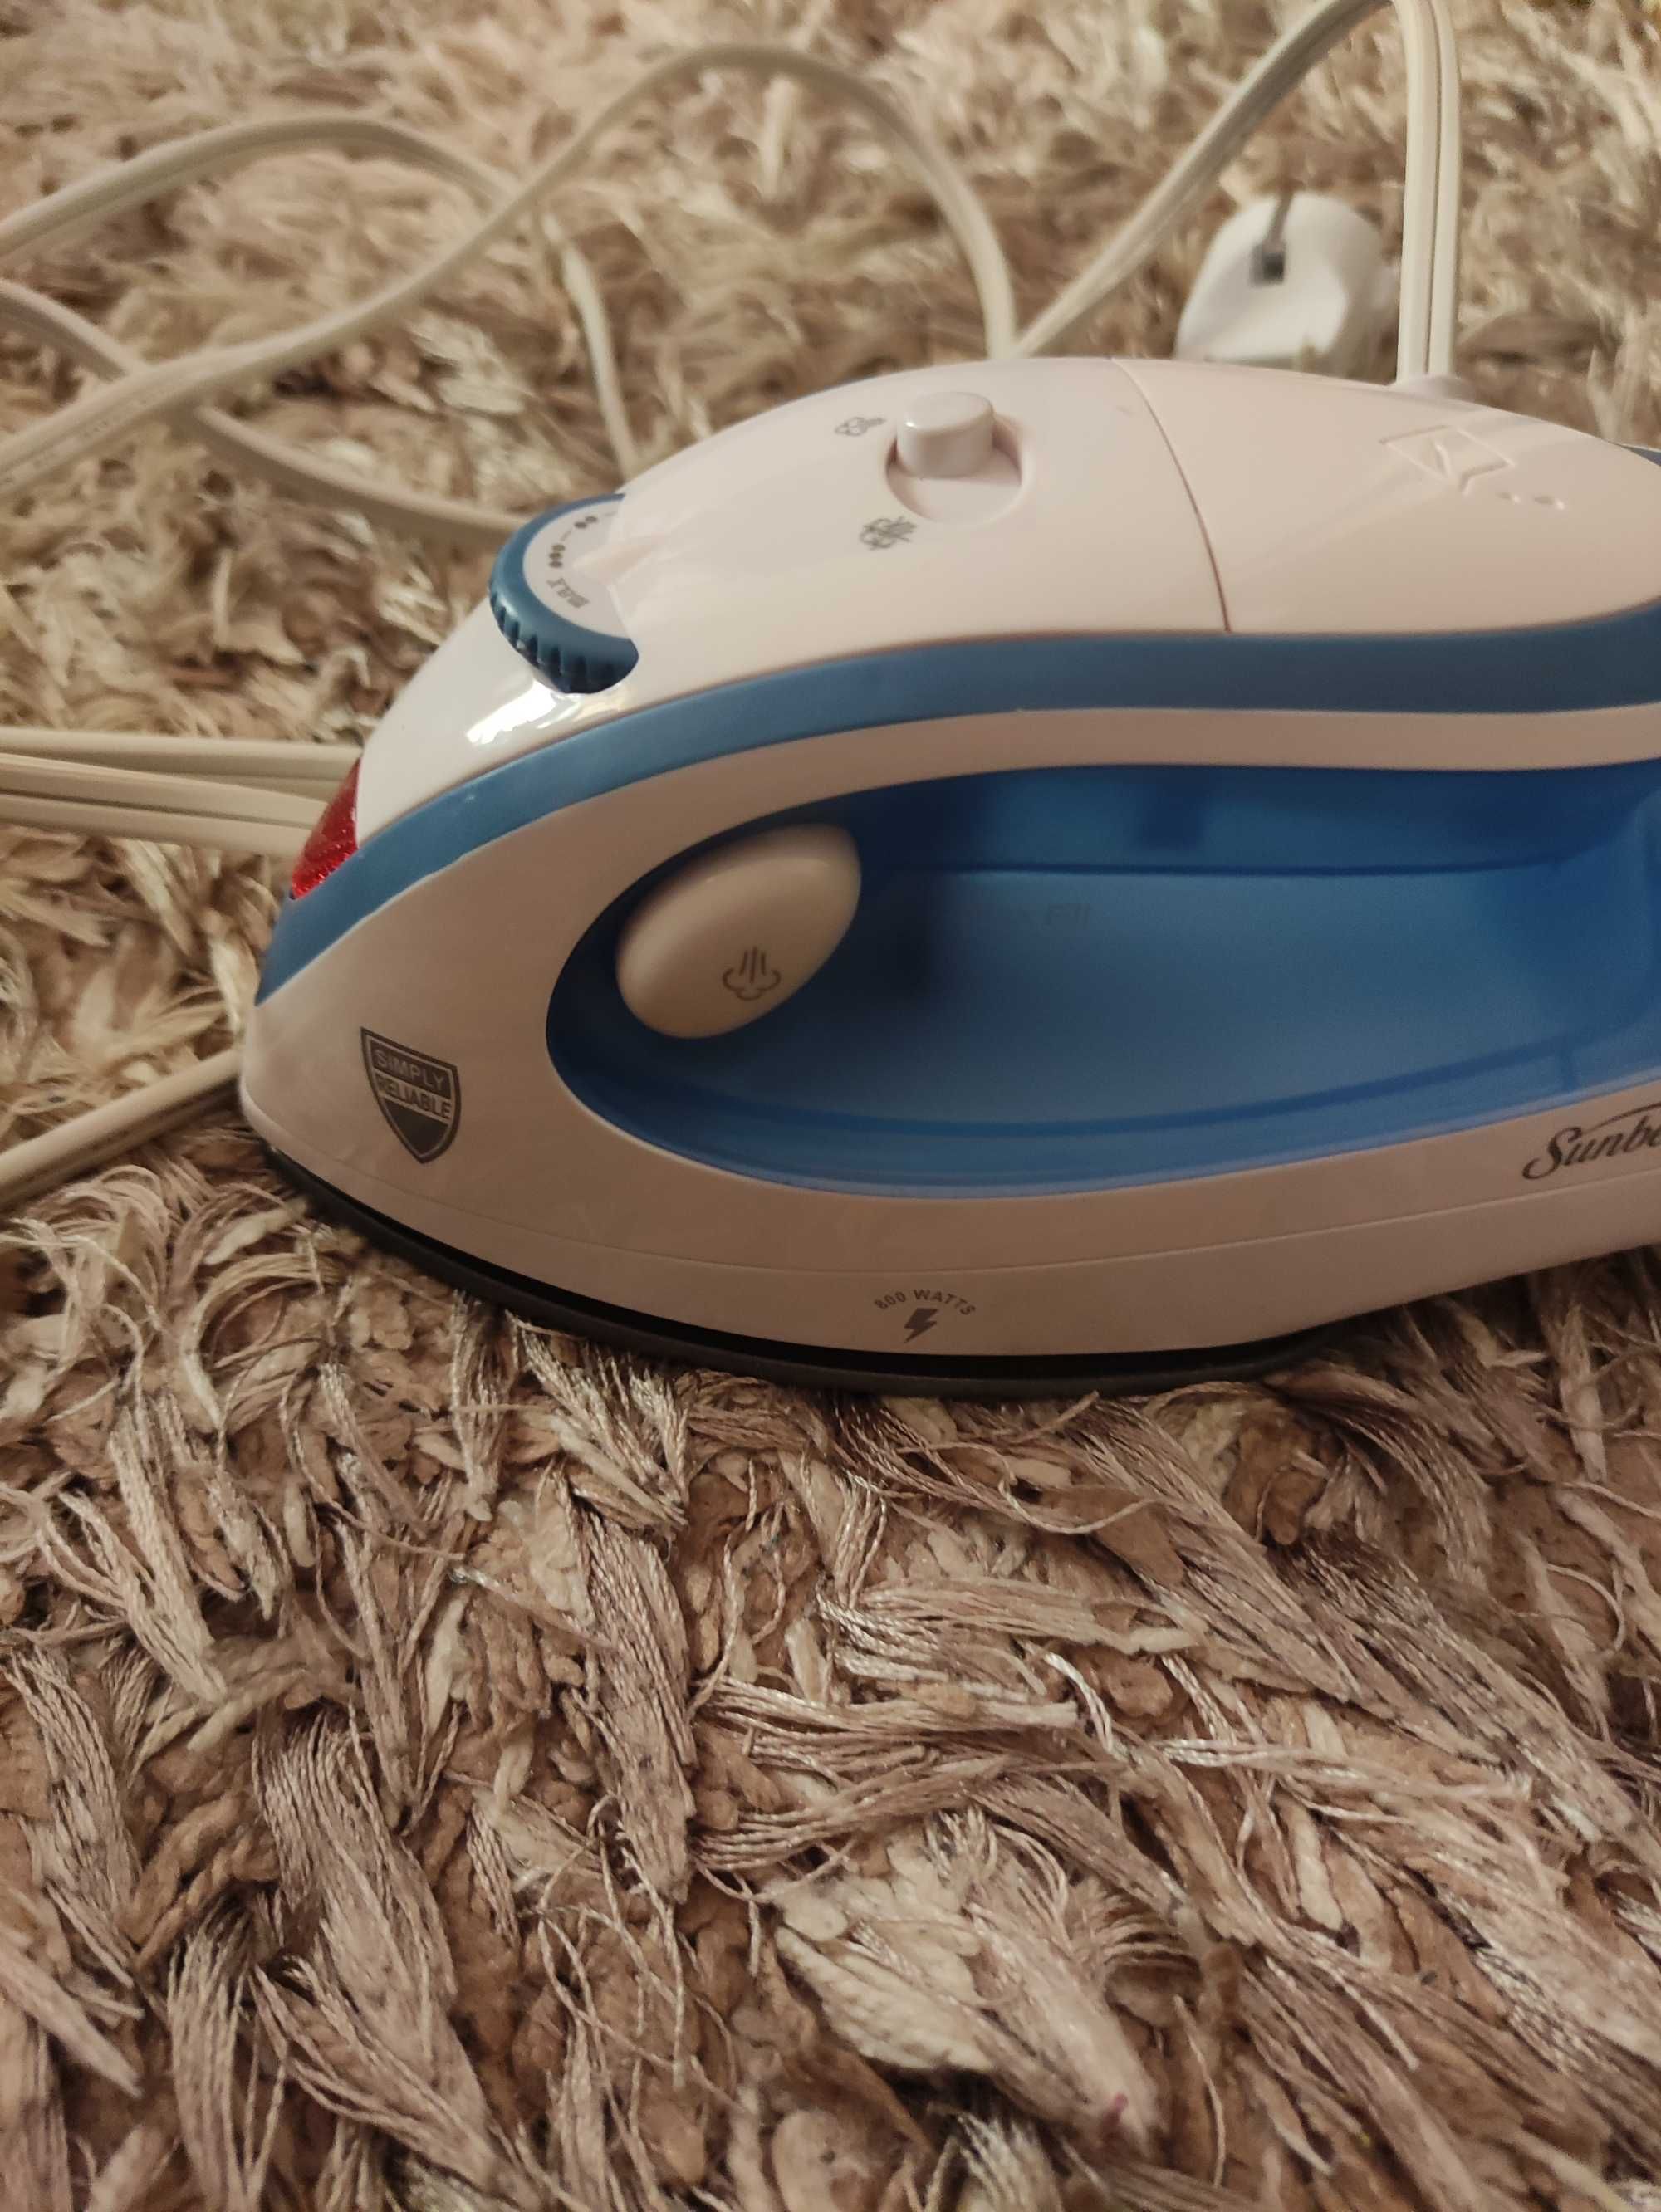 Hot 2 Trot Compact Iron